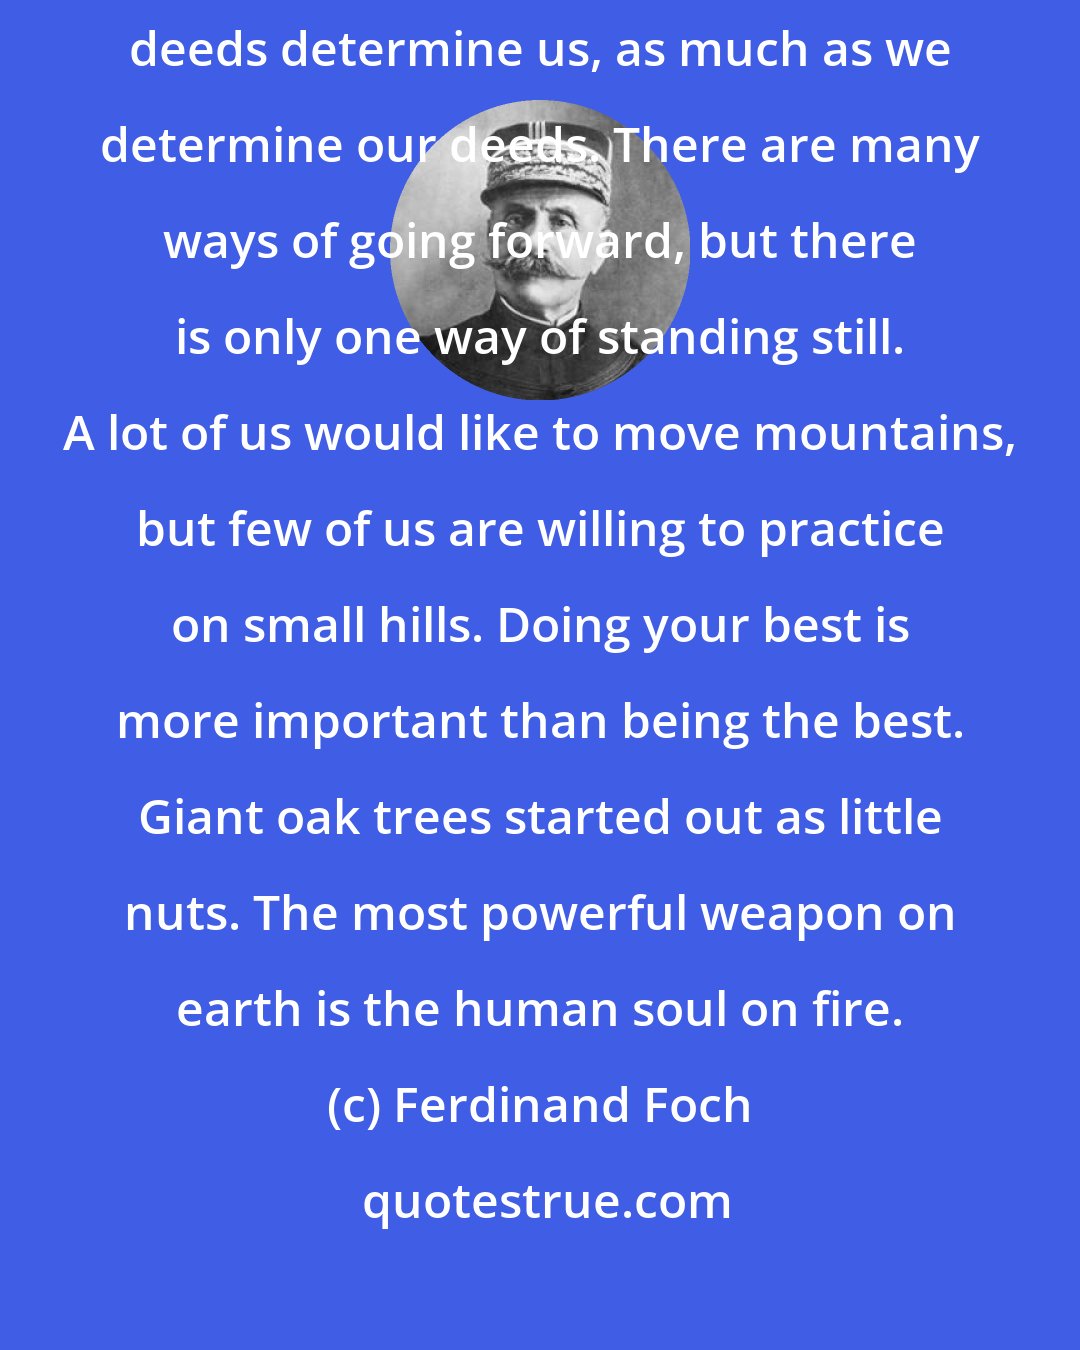 Ferdinand Foch: School is a building that has four walls-with tomorrow inside. Our deeds determine us, as much as we determine our deeds. There are many ways of going forward, but there is only one way of standing still. A lot of us would like to move mountains, but few of us are willing to practice on small hills. Doing your best is more important than being the best. Giant oak trees started out as little nuts. The most powerful weapon on earth is the human soul on fire.